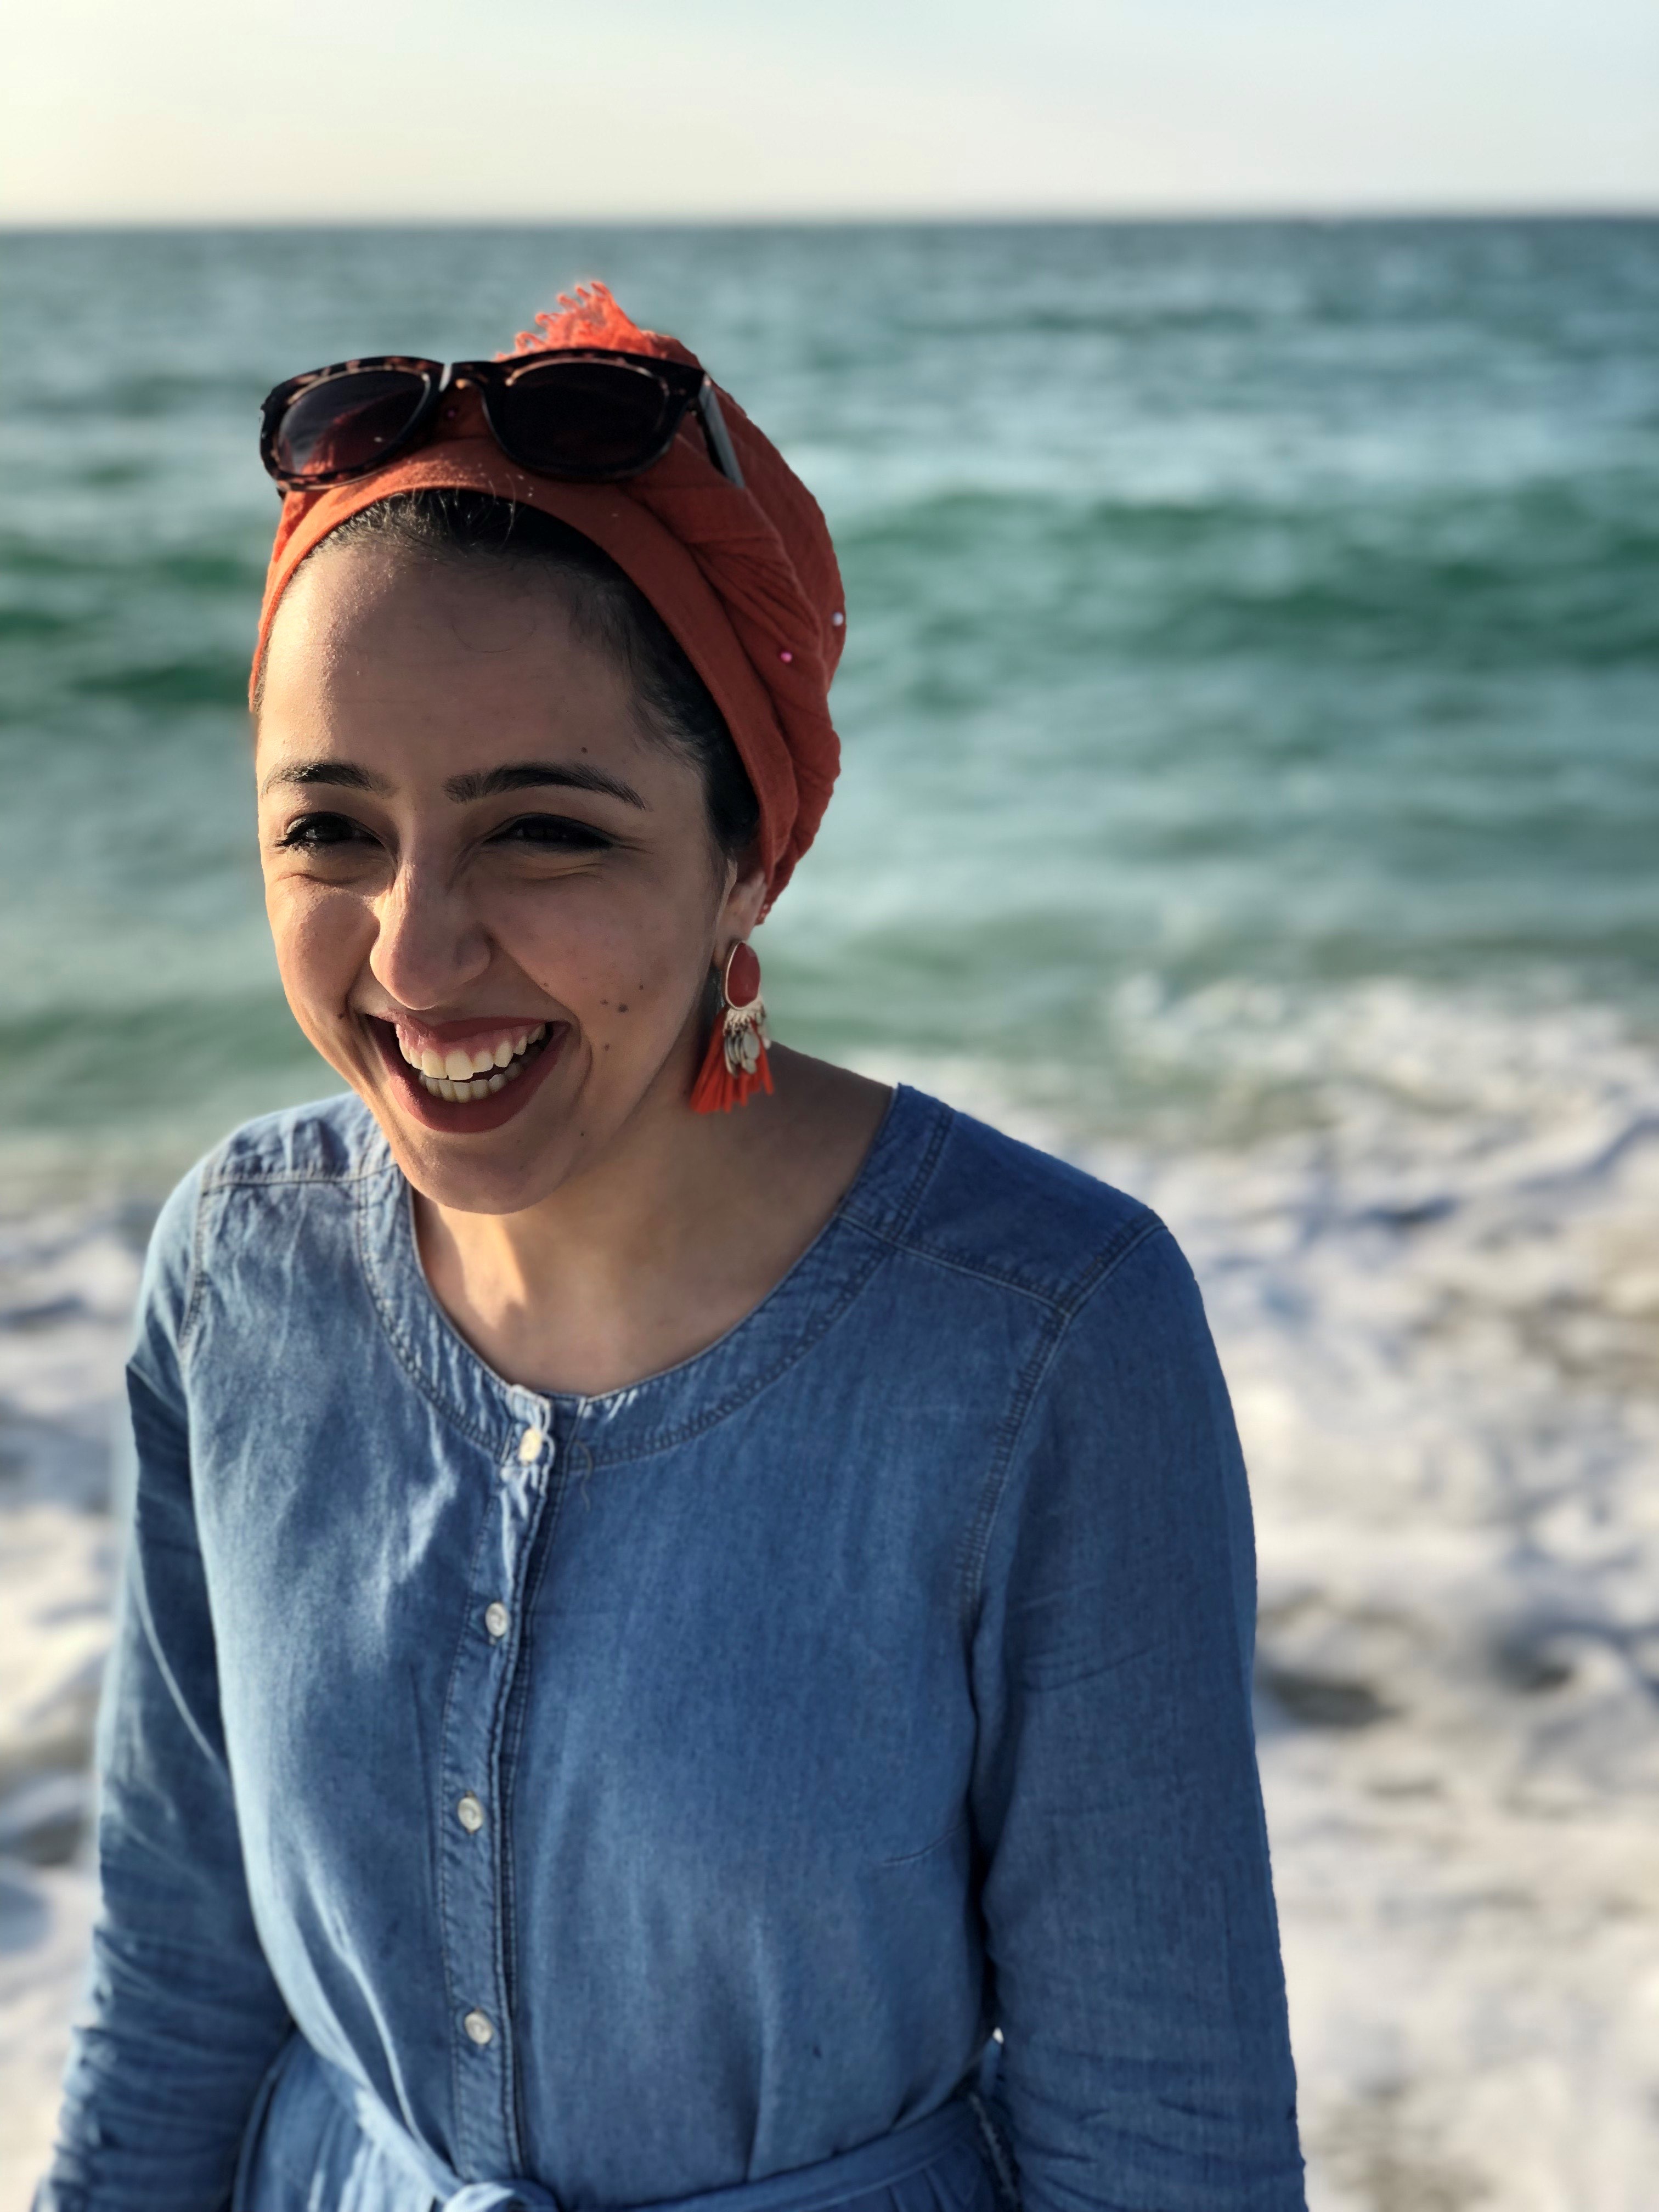 Zinab wearing a blue shirt at the beach with the ocean in the background